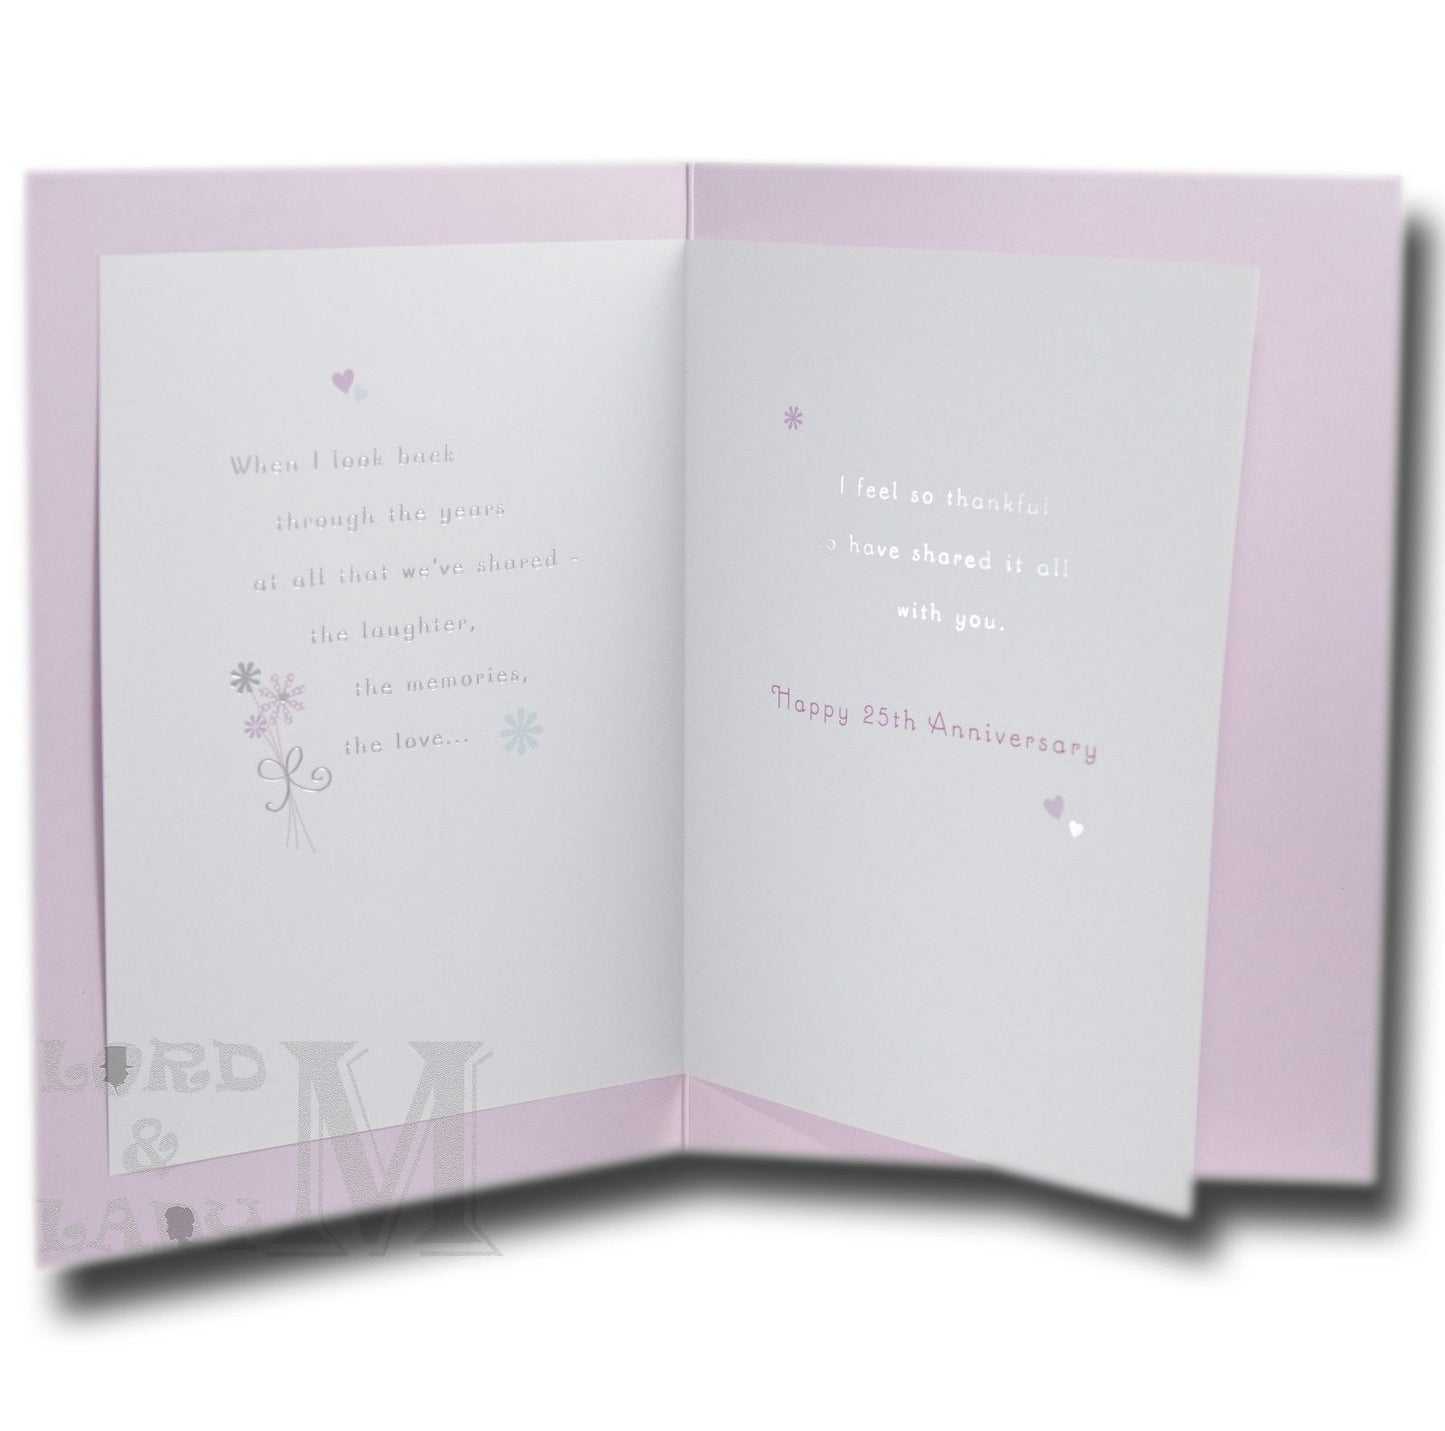 23cm - To My Wonderful Wife On... - Large Letter